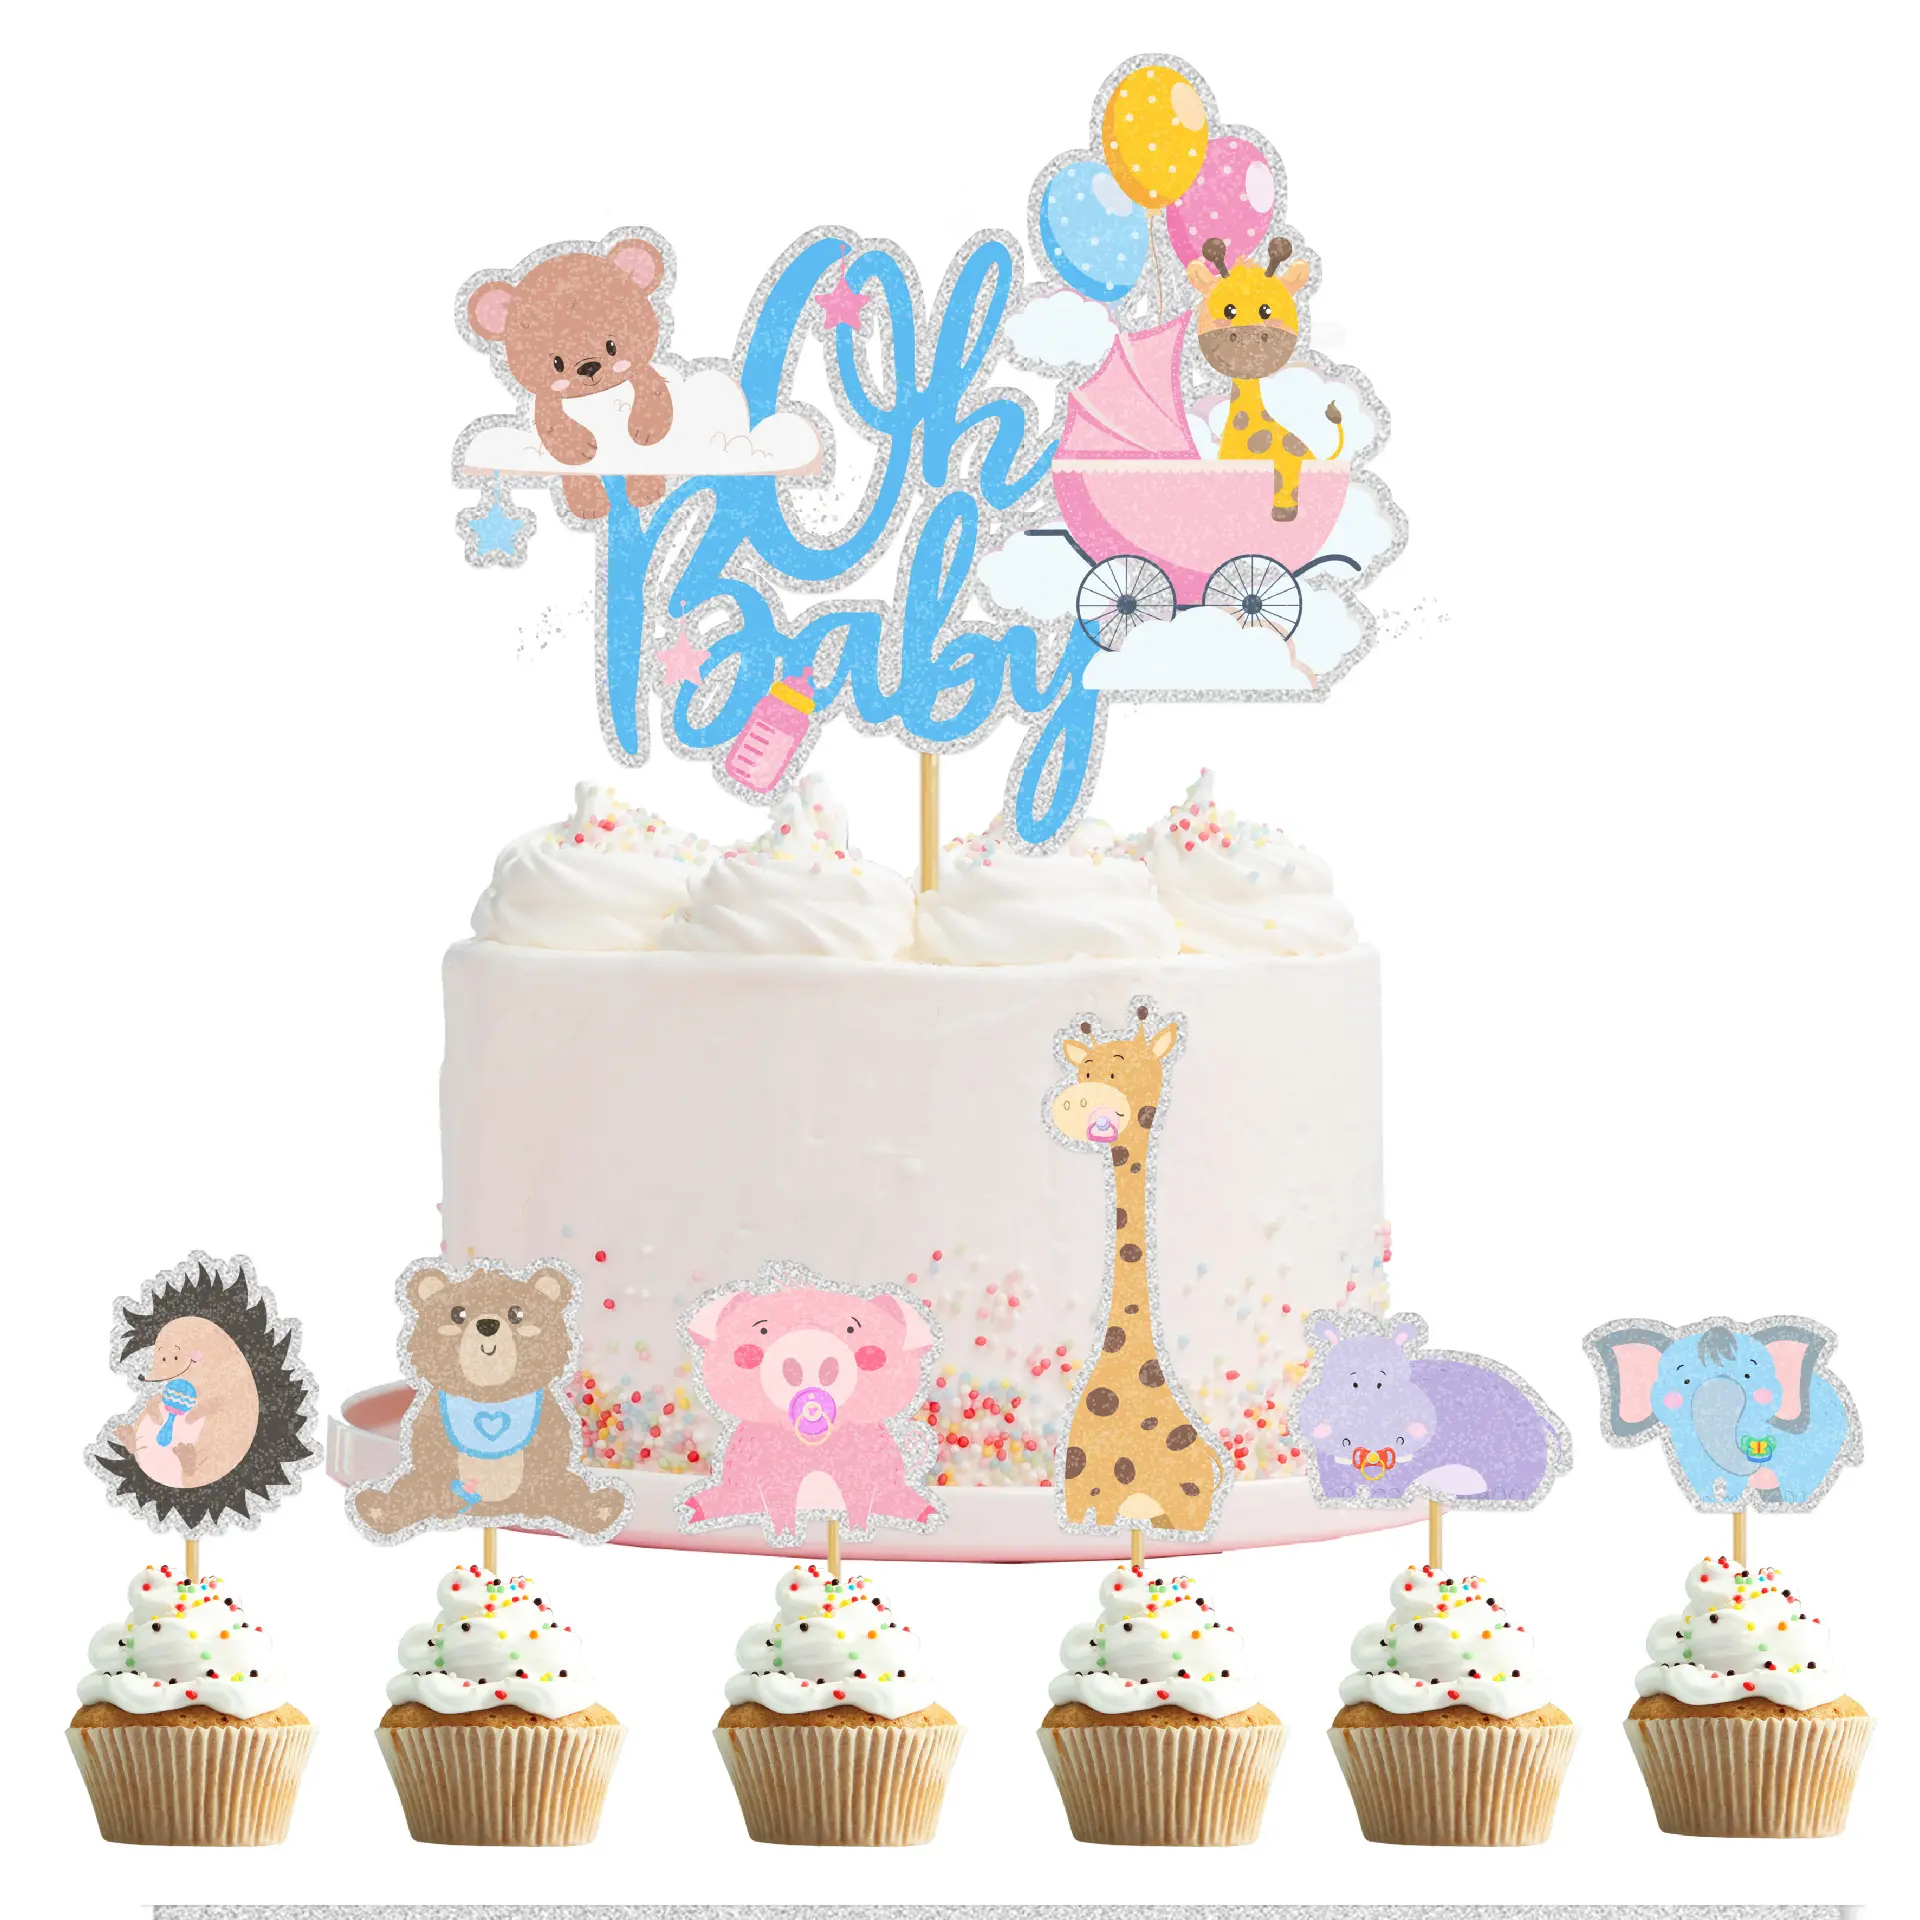 New Oh Baby Cake Topper Decorations Set Baby Birthday Party Cake Pictures Wholesale